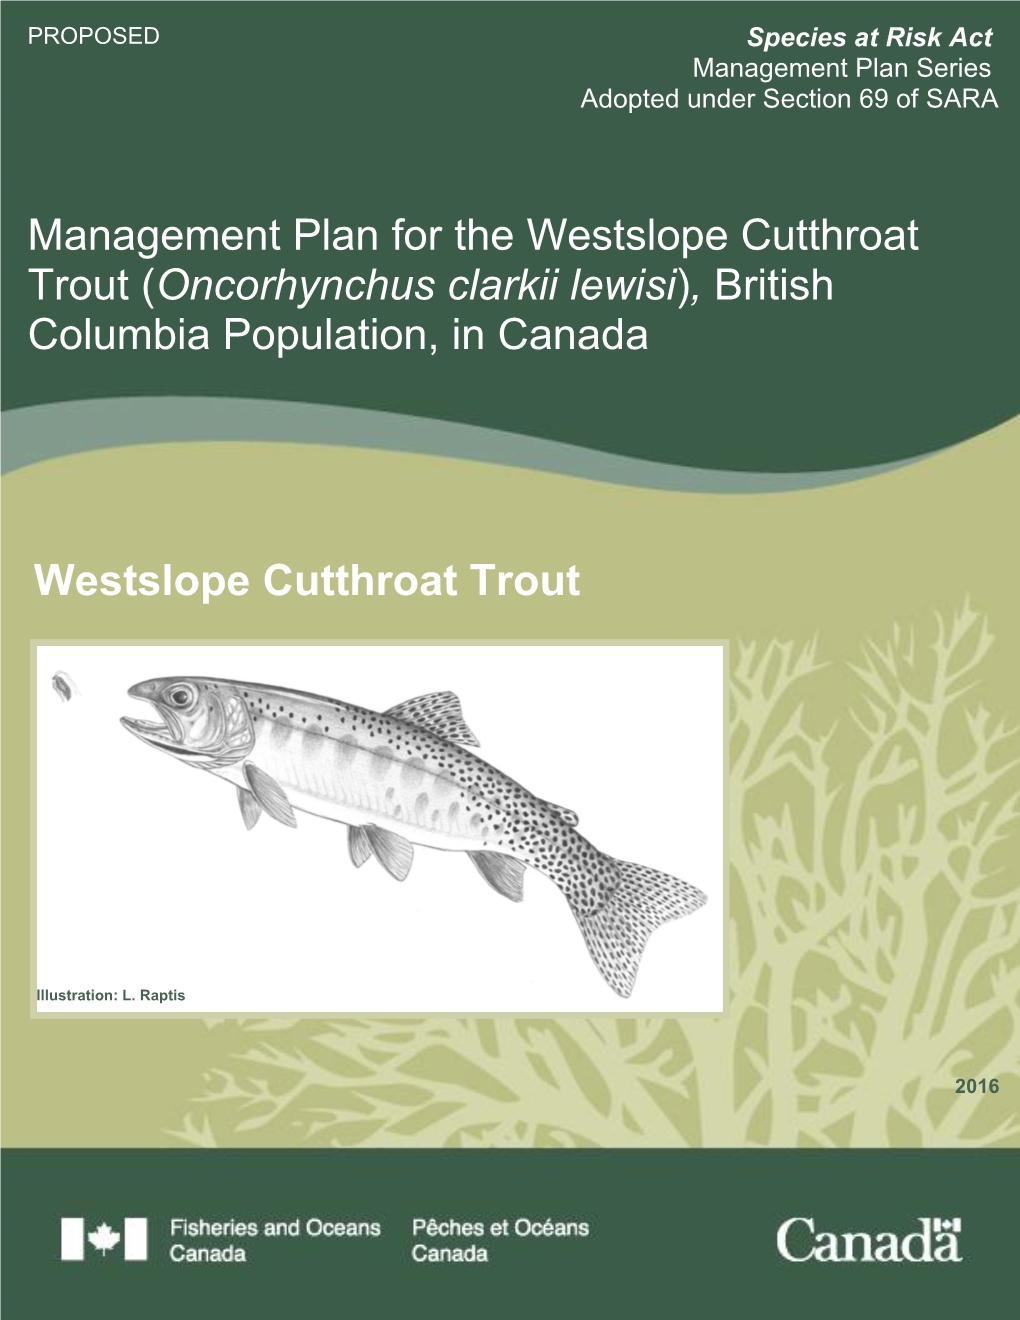 Management Plan for the Westslope Cutthroat Trout (British Columbia Population)Management [PROPOSED] Plan2016 Series Adopted Under Section 69 of SARA